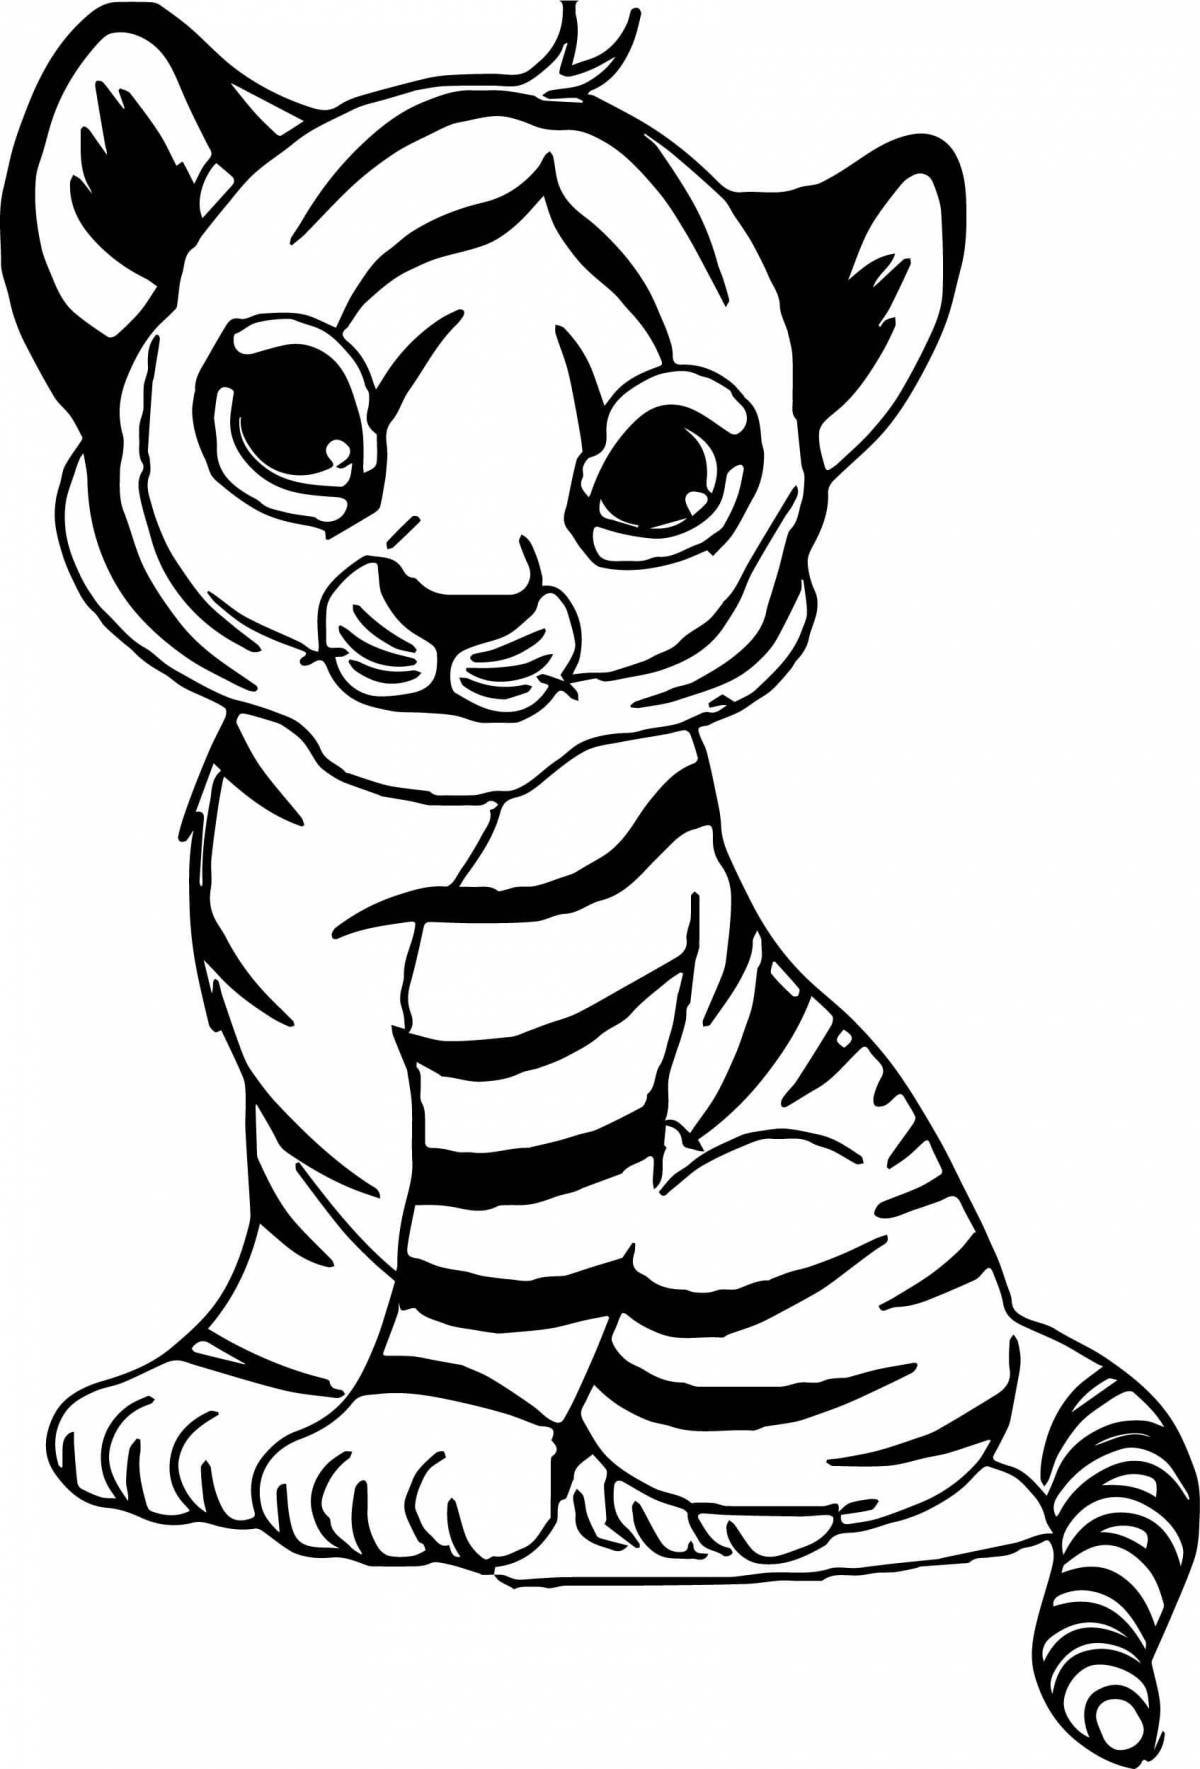 Cute tiger coloring book for kids